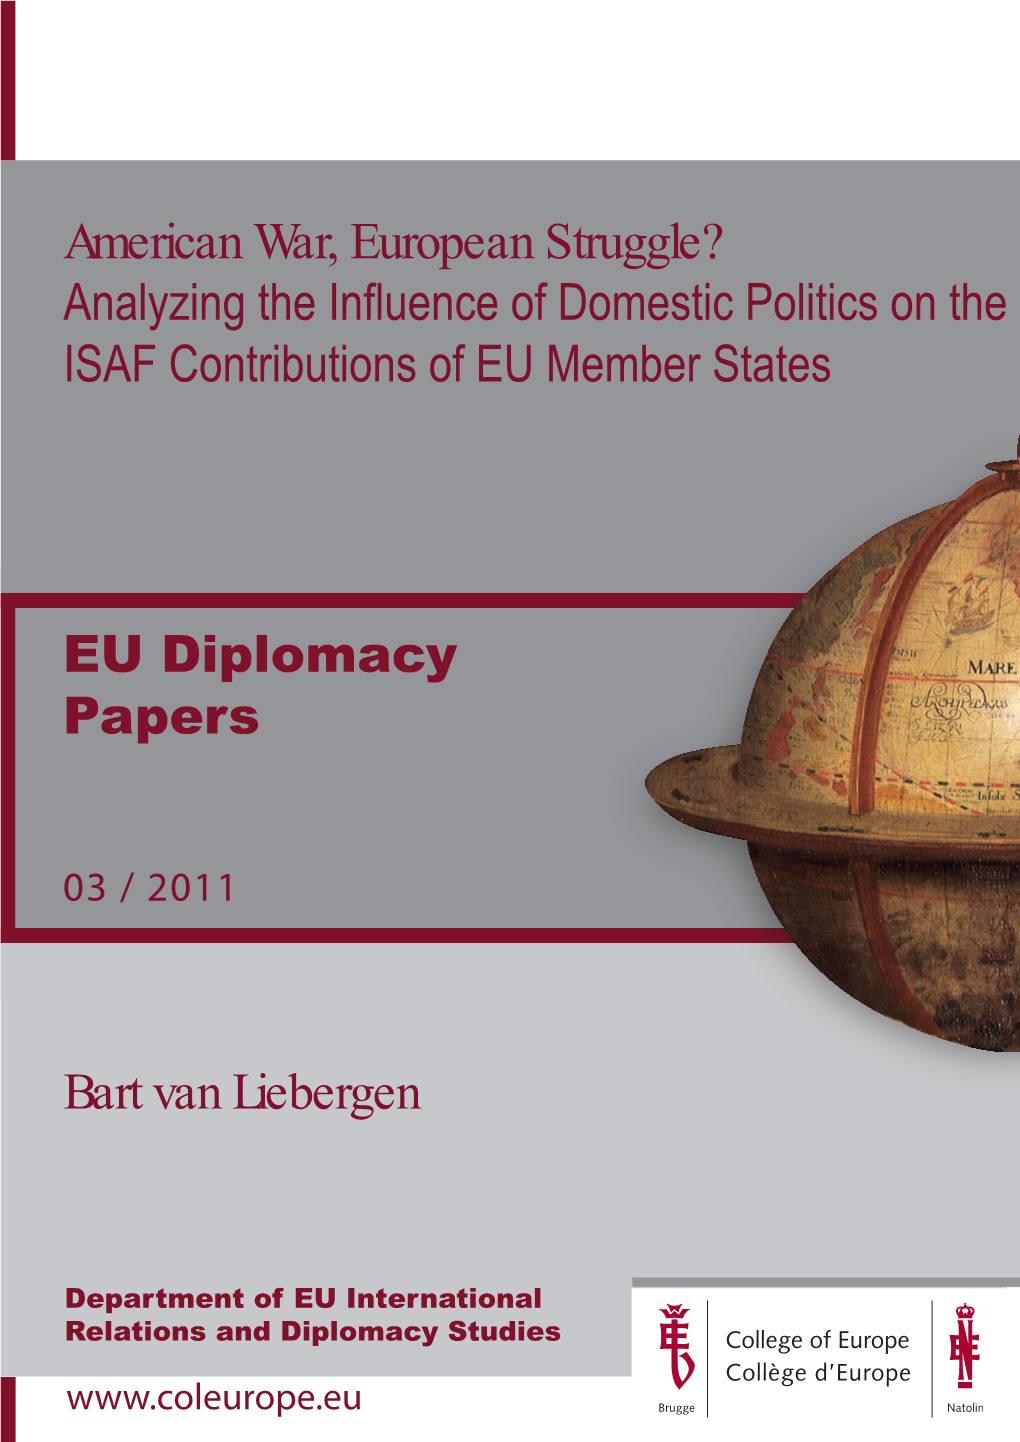 Analyzing the Influence of Domestic Politics on the ISAF Contributions of EU Member States